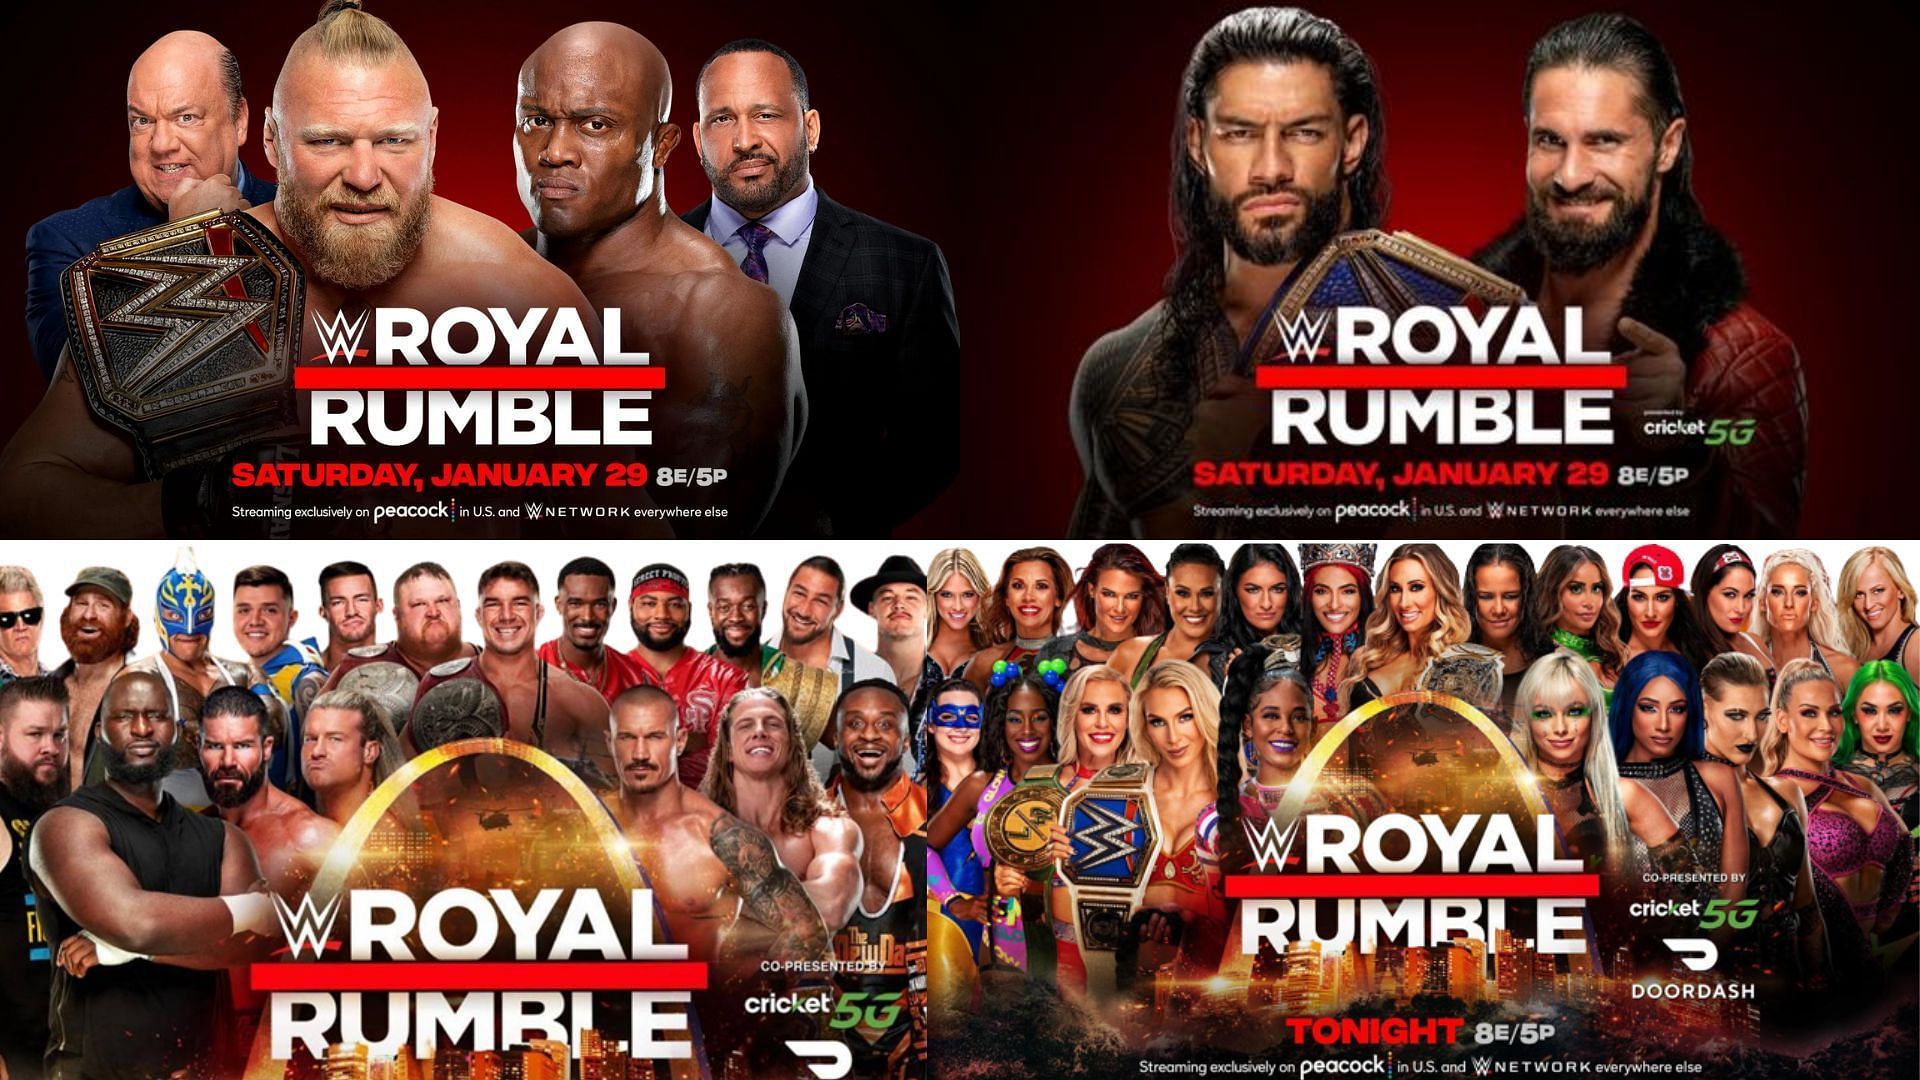 The 2022 edition of Royal Rumble was widely panned by critics and audiences alike